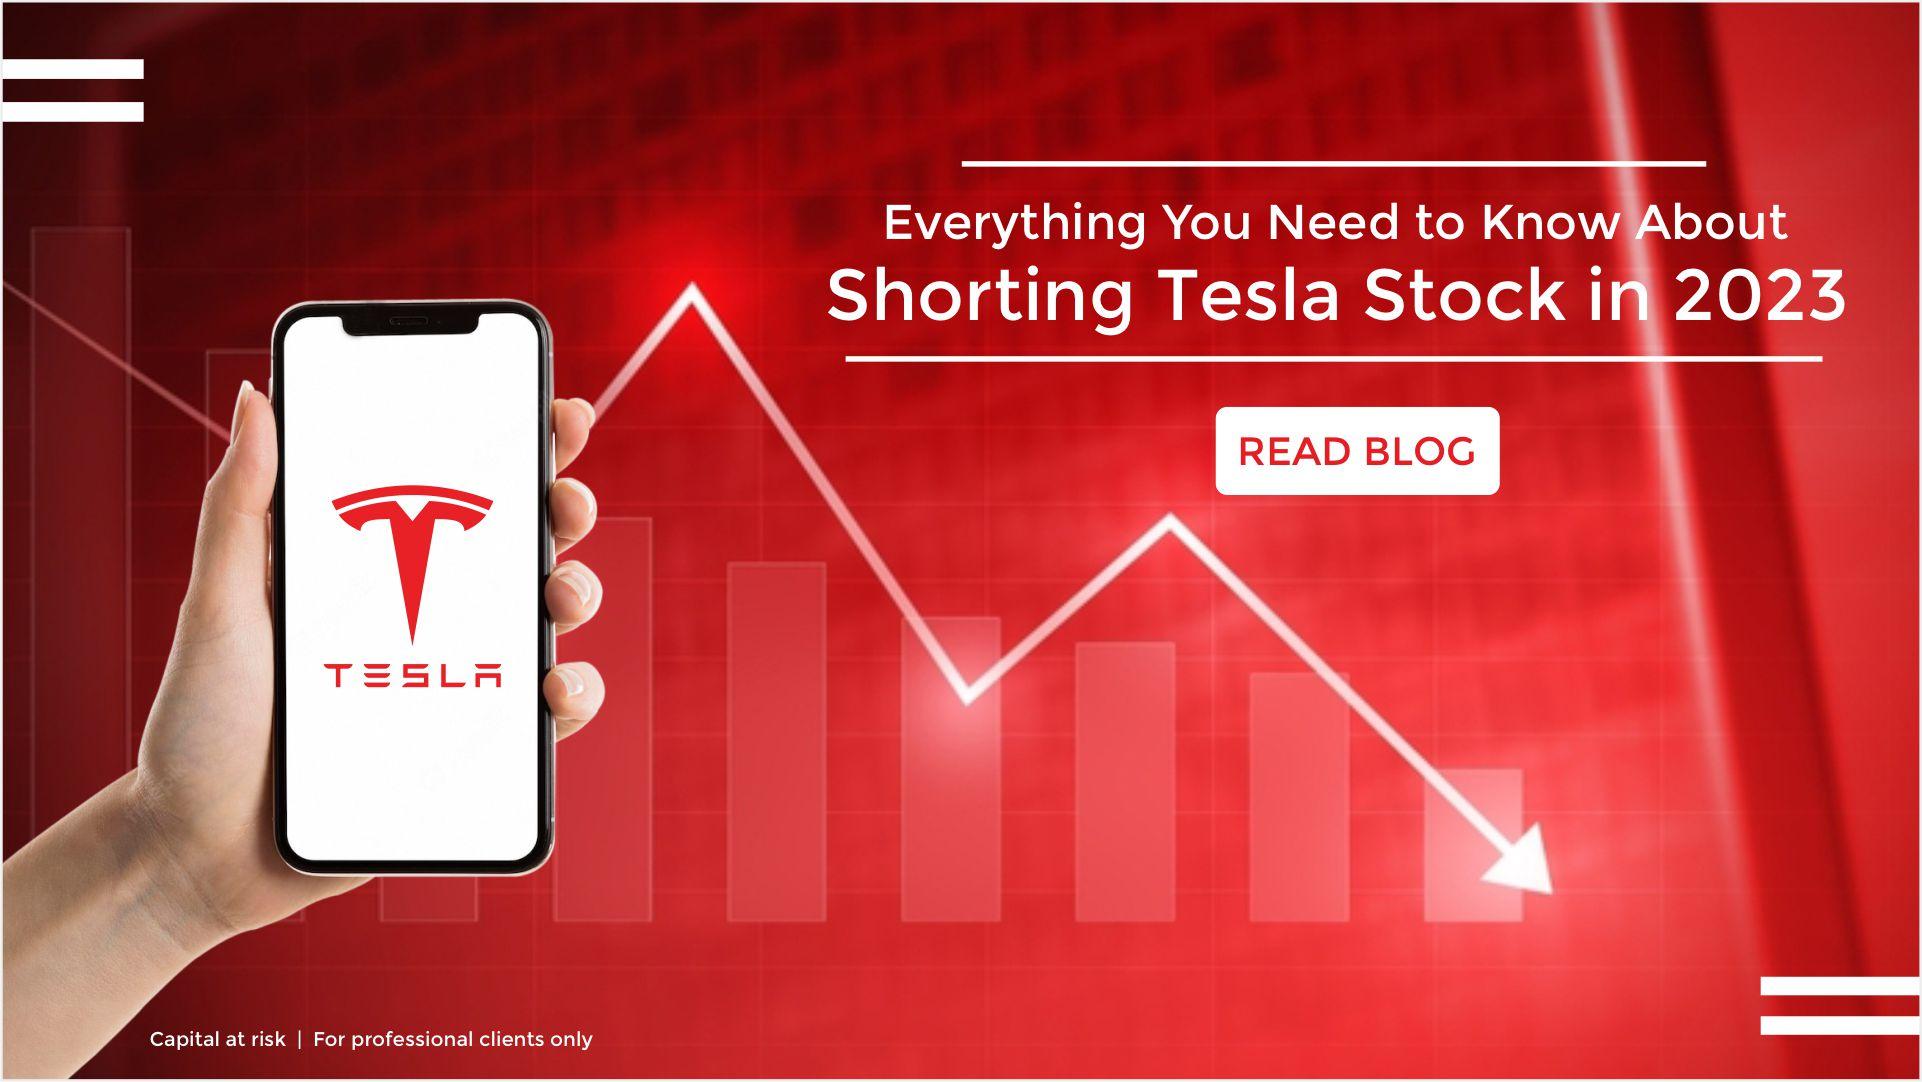 Everything you need to know about shorting Tesla stock in 2023